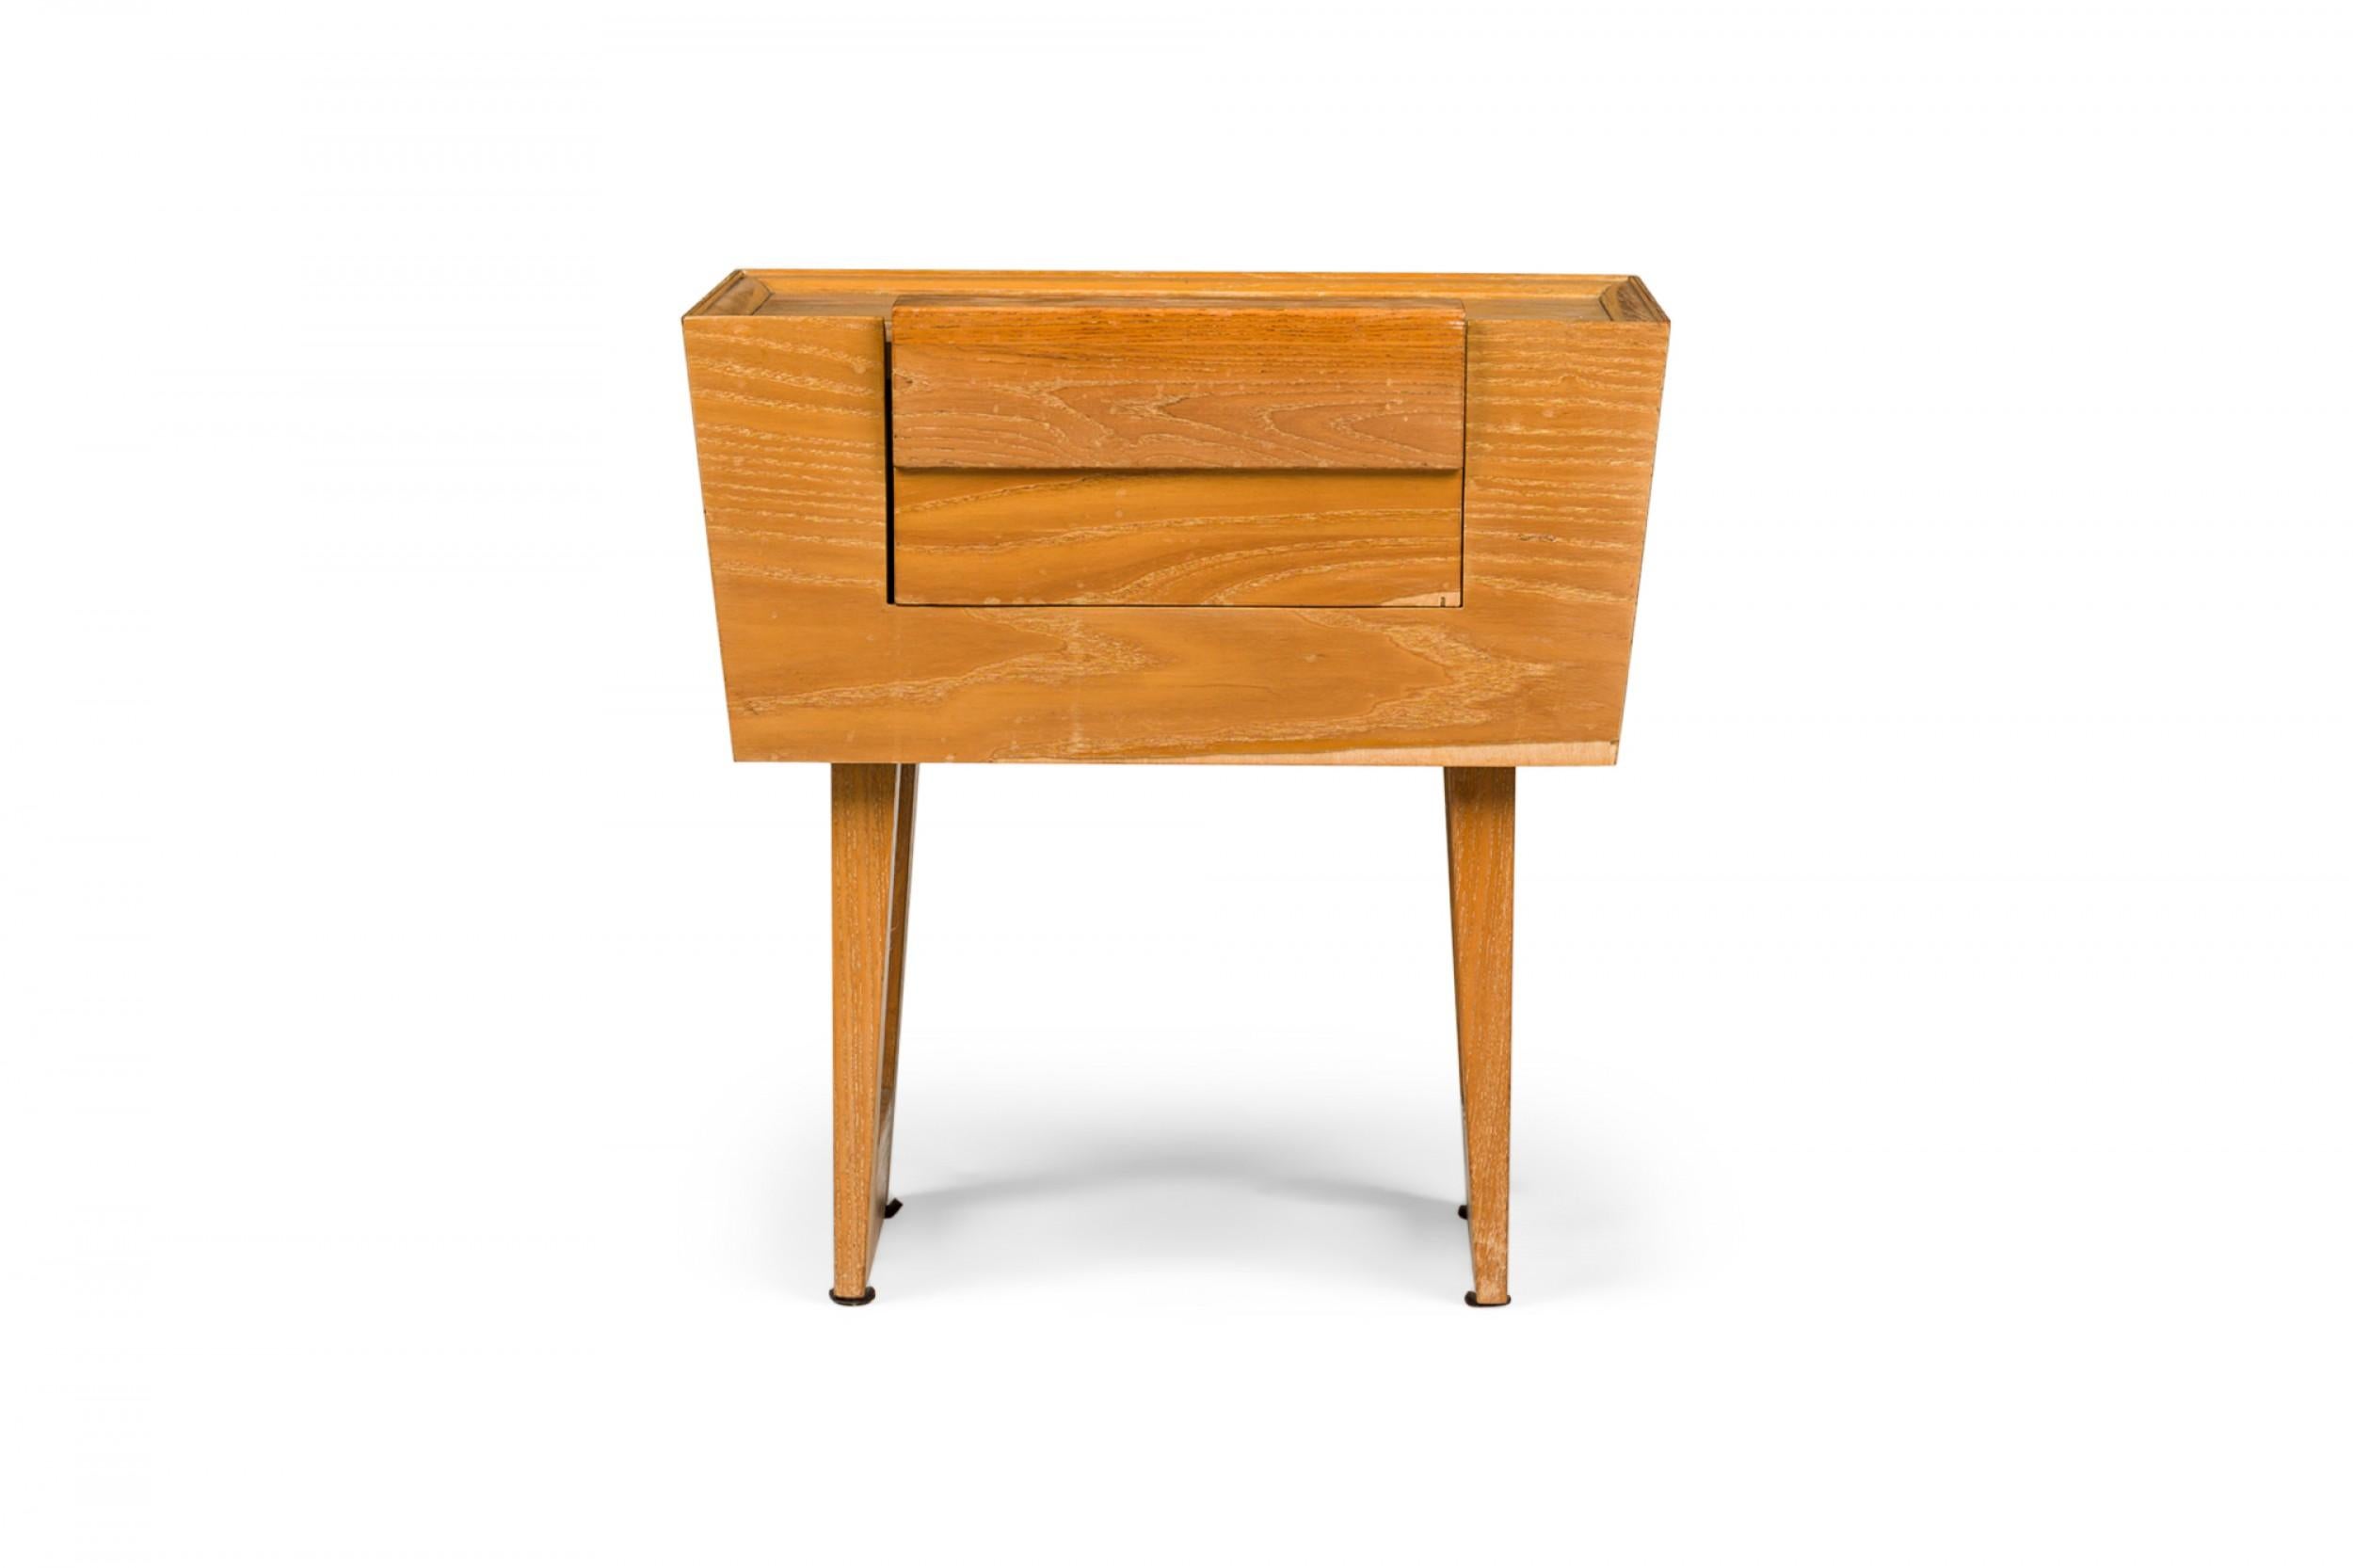 SET of 3 American mid-century wooden nightstands with a slightly cerused finish, tapered trapezoidal cabinets containing a single drawer, resting on two bracket-shaped legs. (PAUL LASZLO FOR BROWN SALTMAN)(PRICED AS SET)